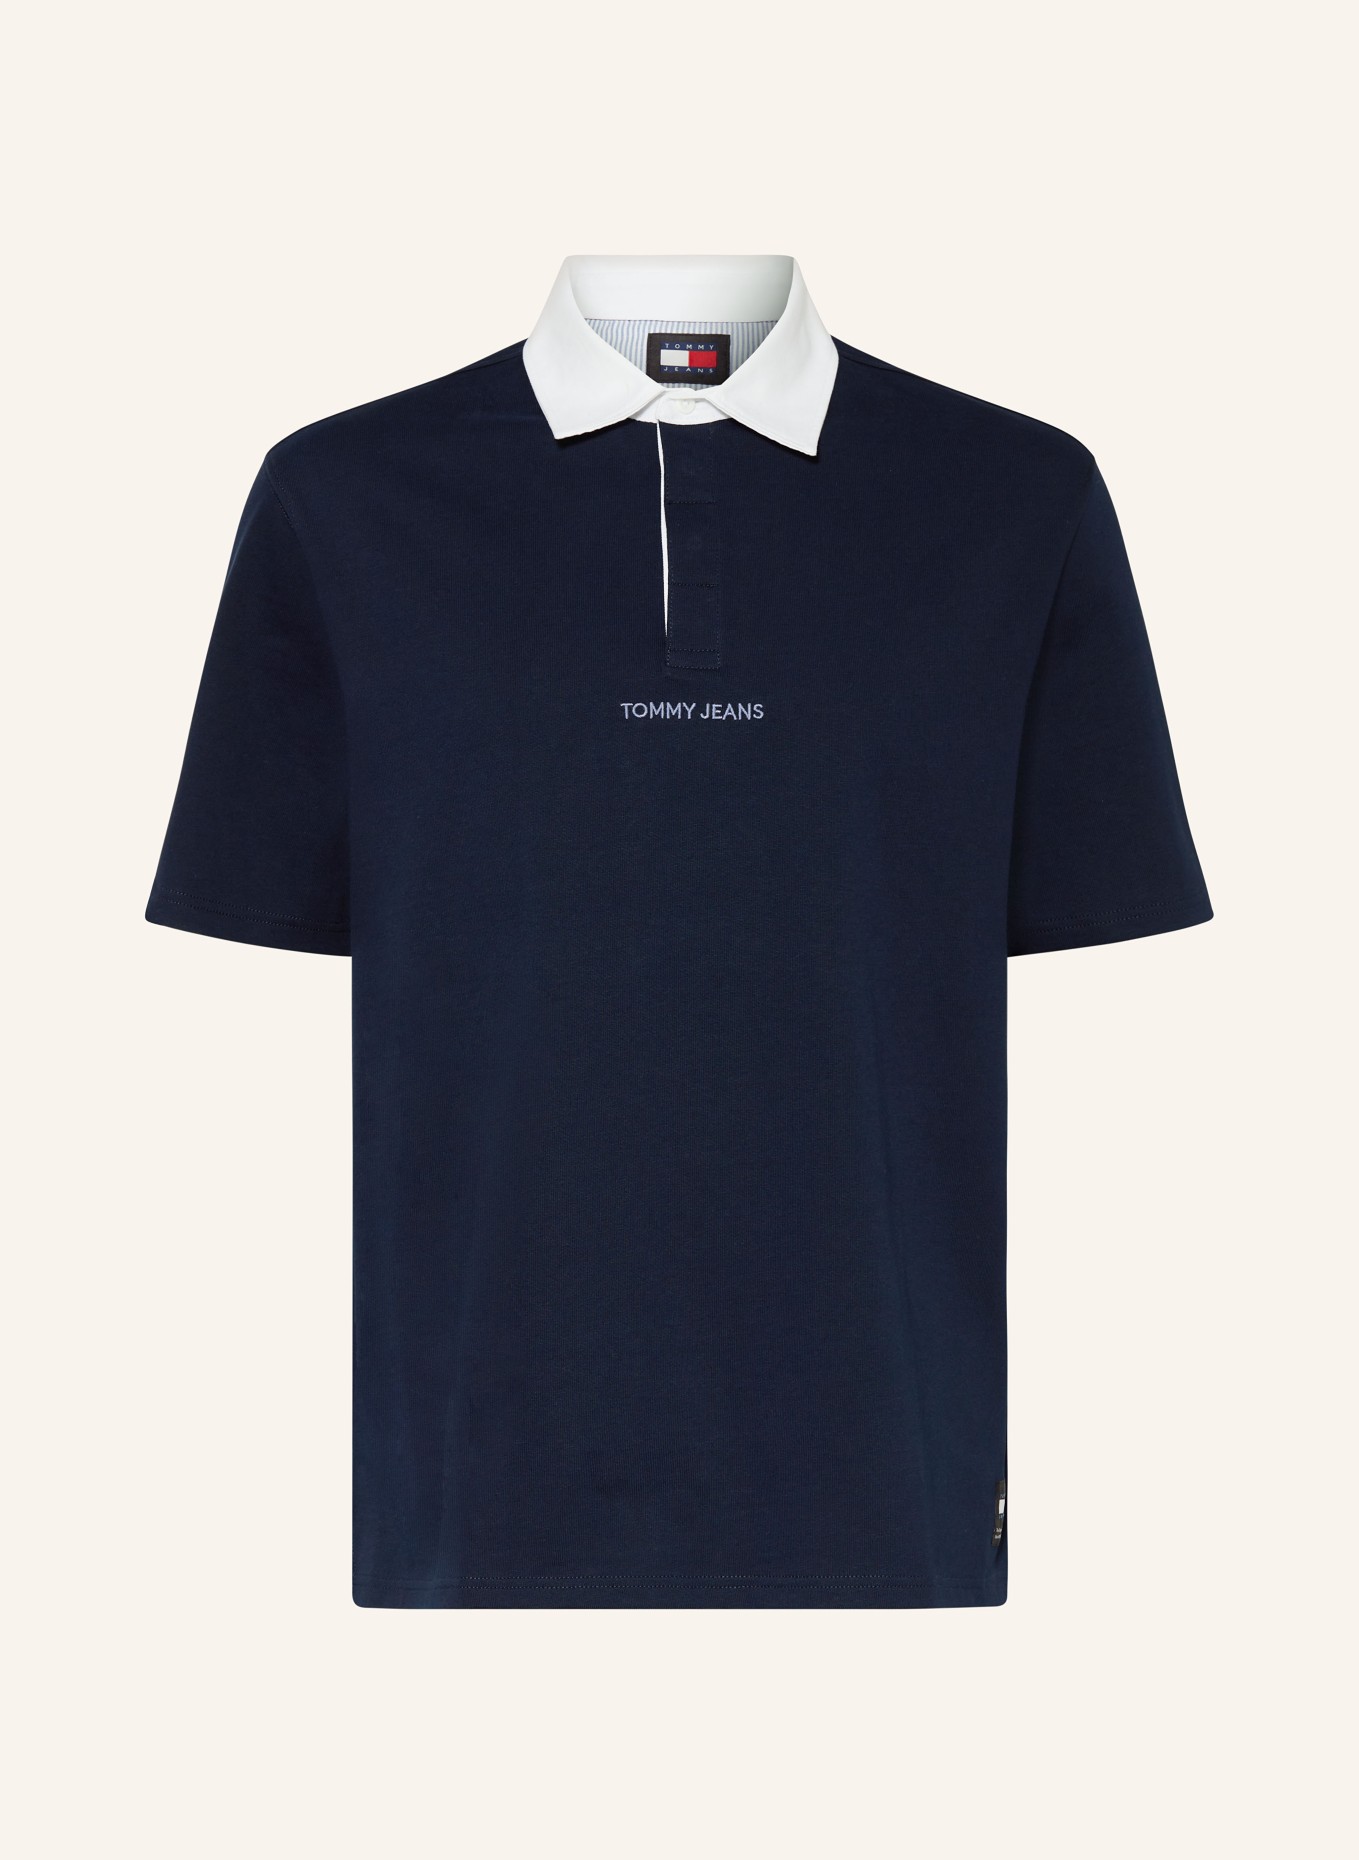 TOMMY JEANS Jersey polo shirt oversized fit, Color: DARK BLUE (Image 1)